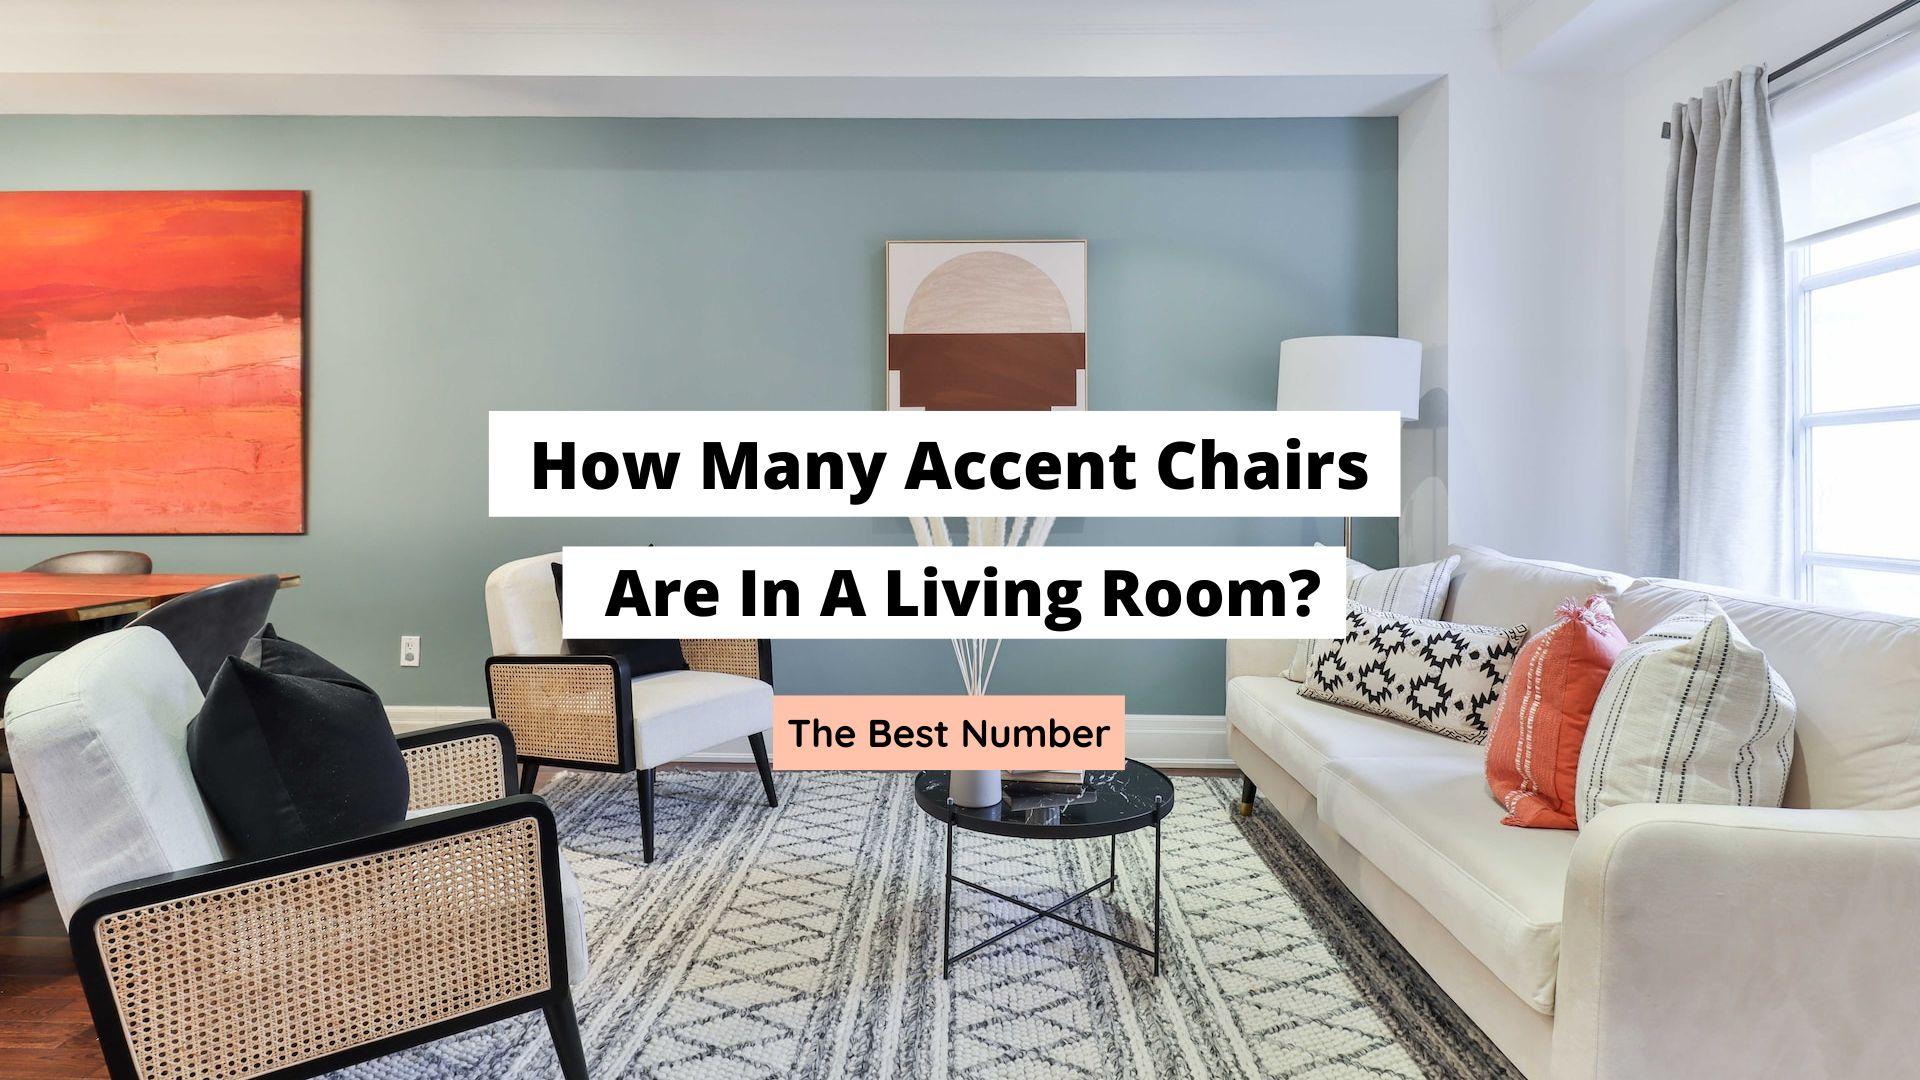 How Many Accent Chairs Are In A Living Room